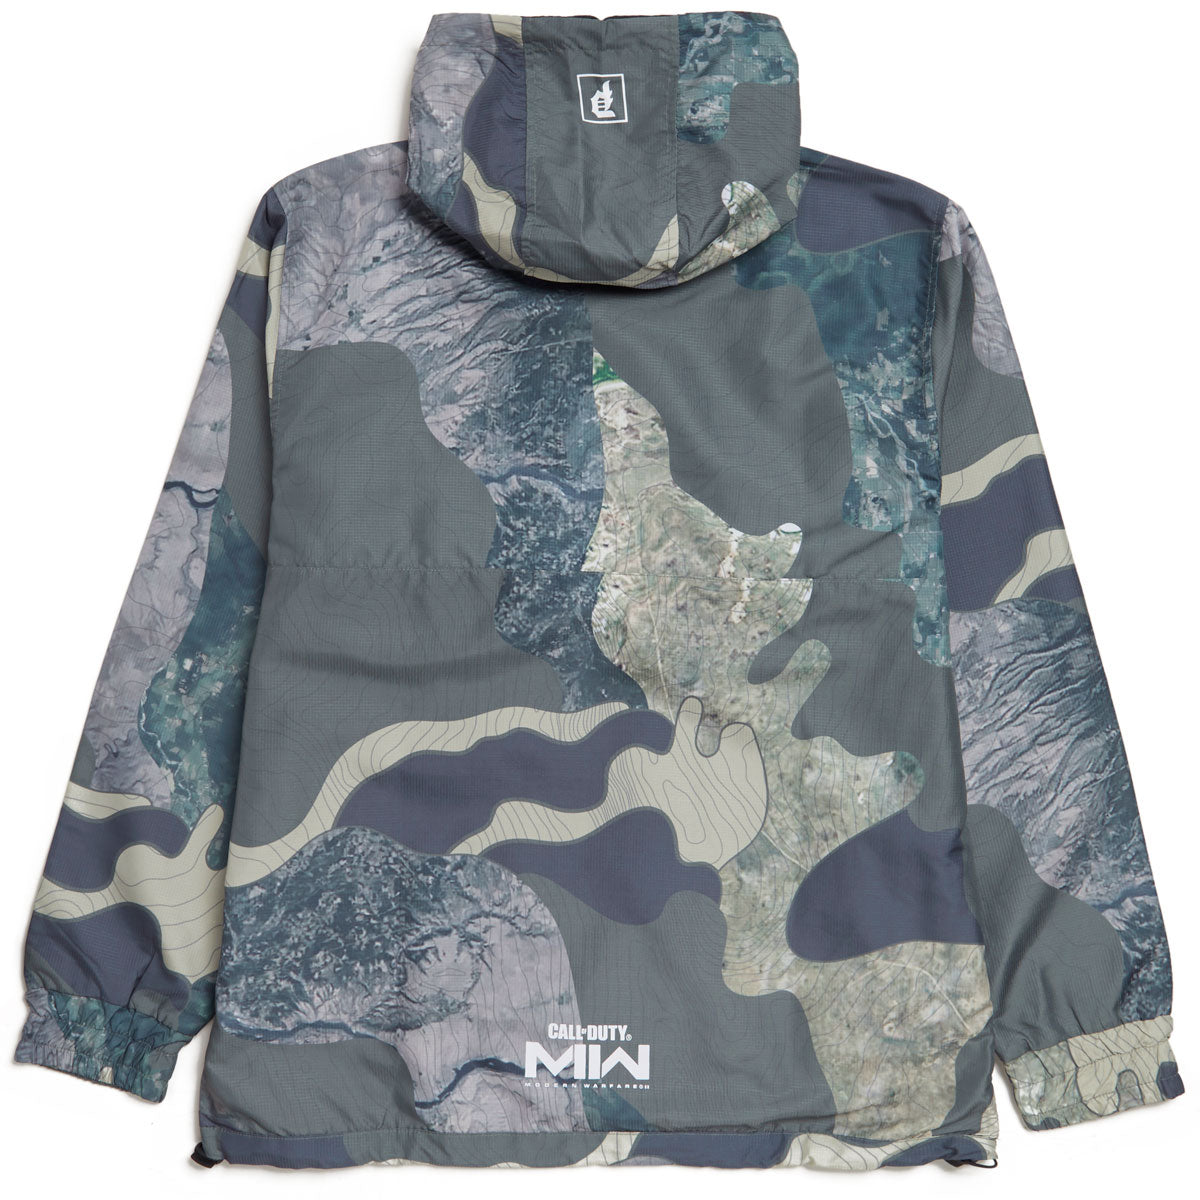 Primitive x Call Of Duty Mapping Anroak Jacket - Olive image 2